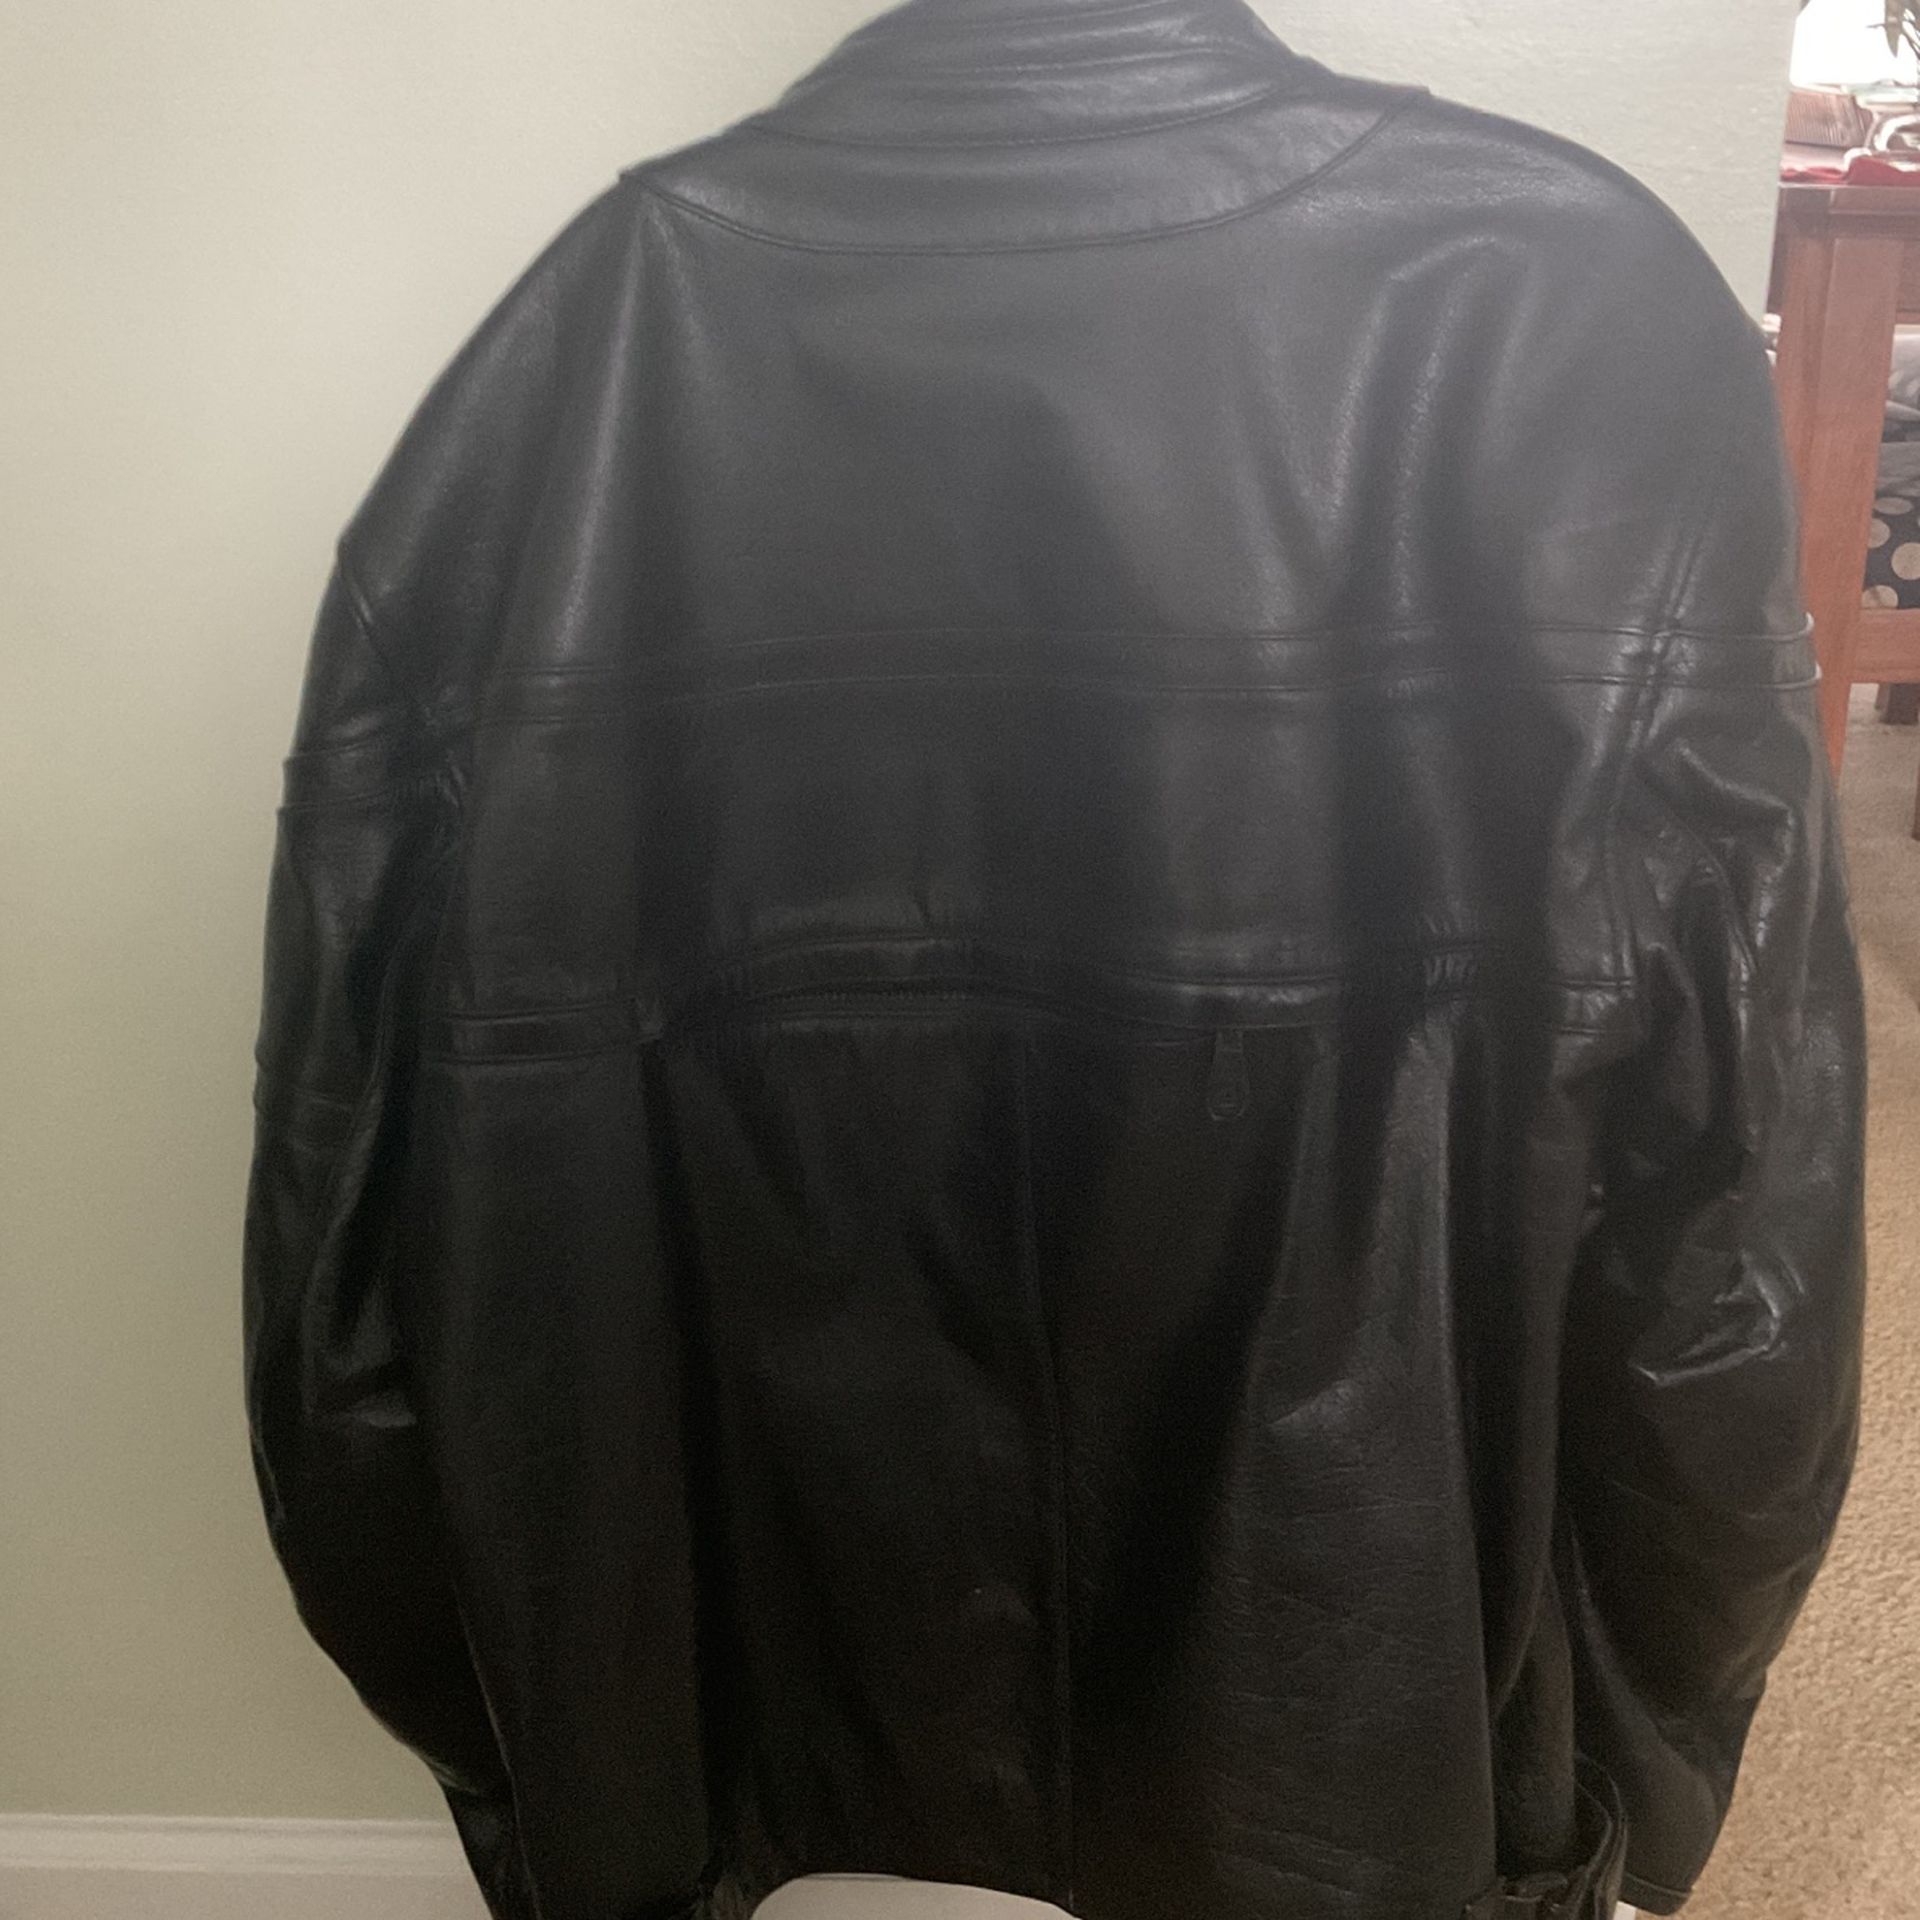 This is a motorcycle jacket larger with a padding at the elbows and back